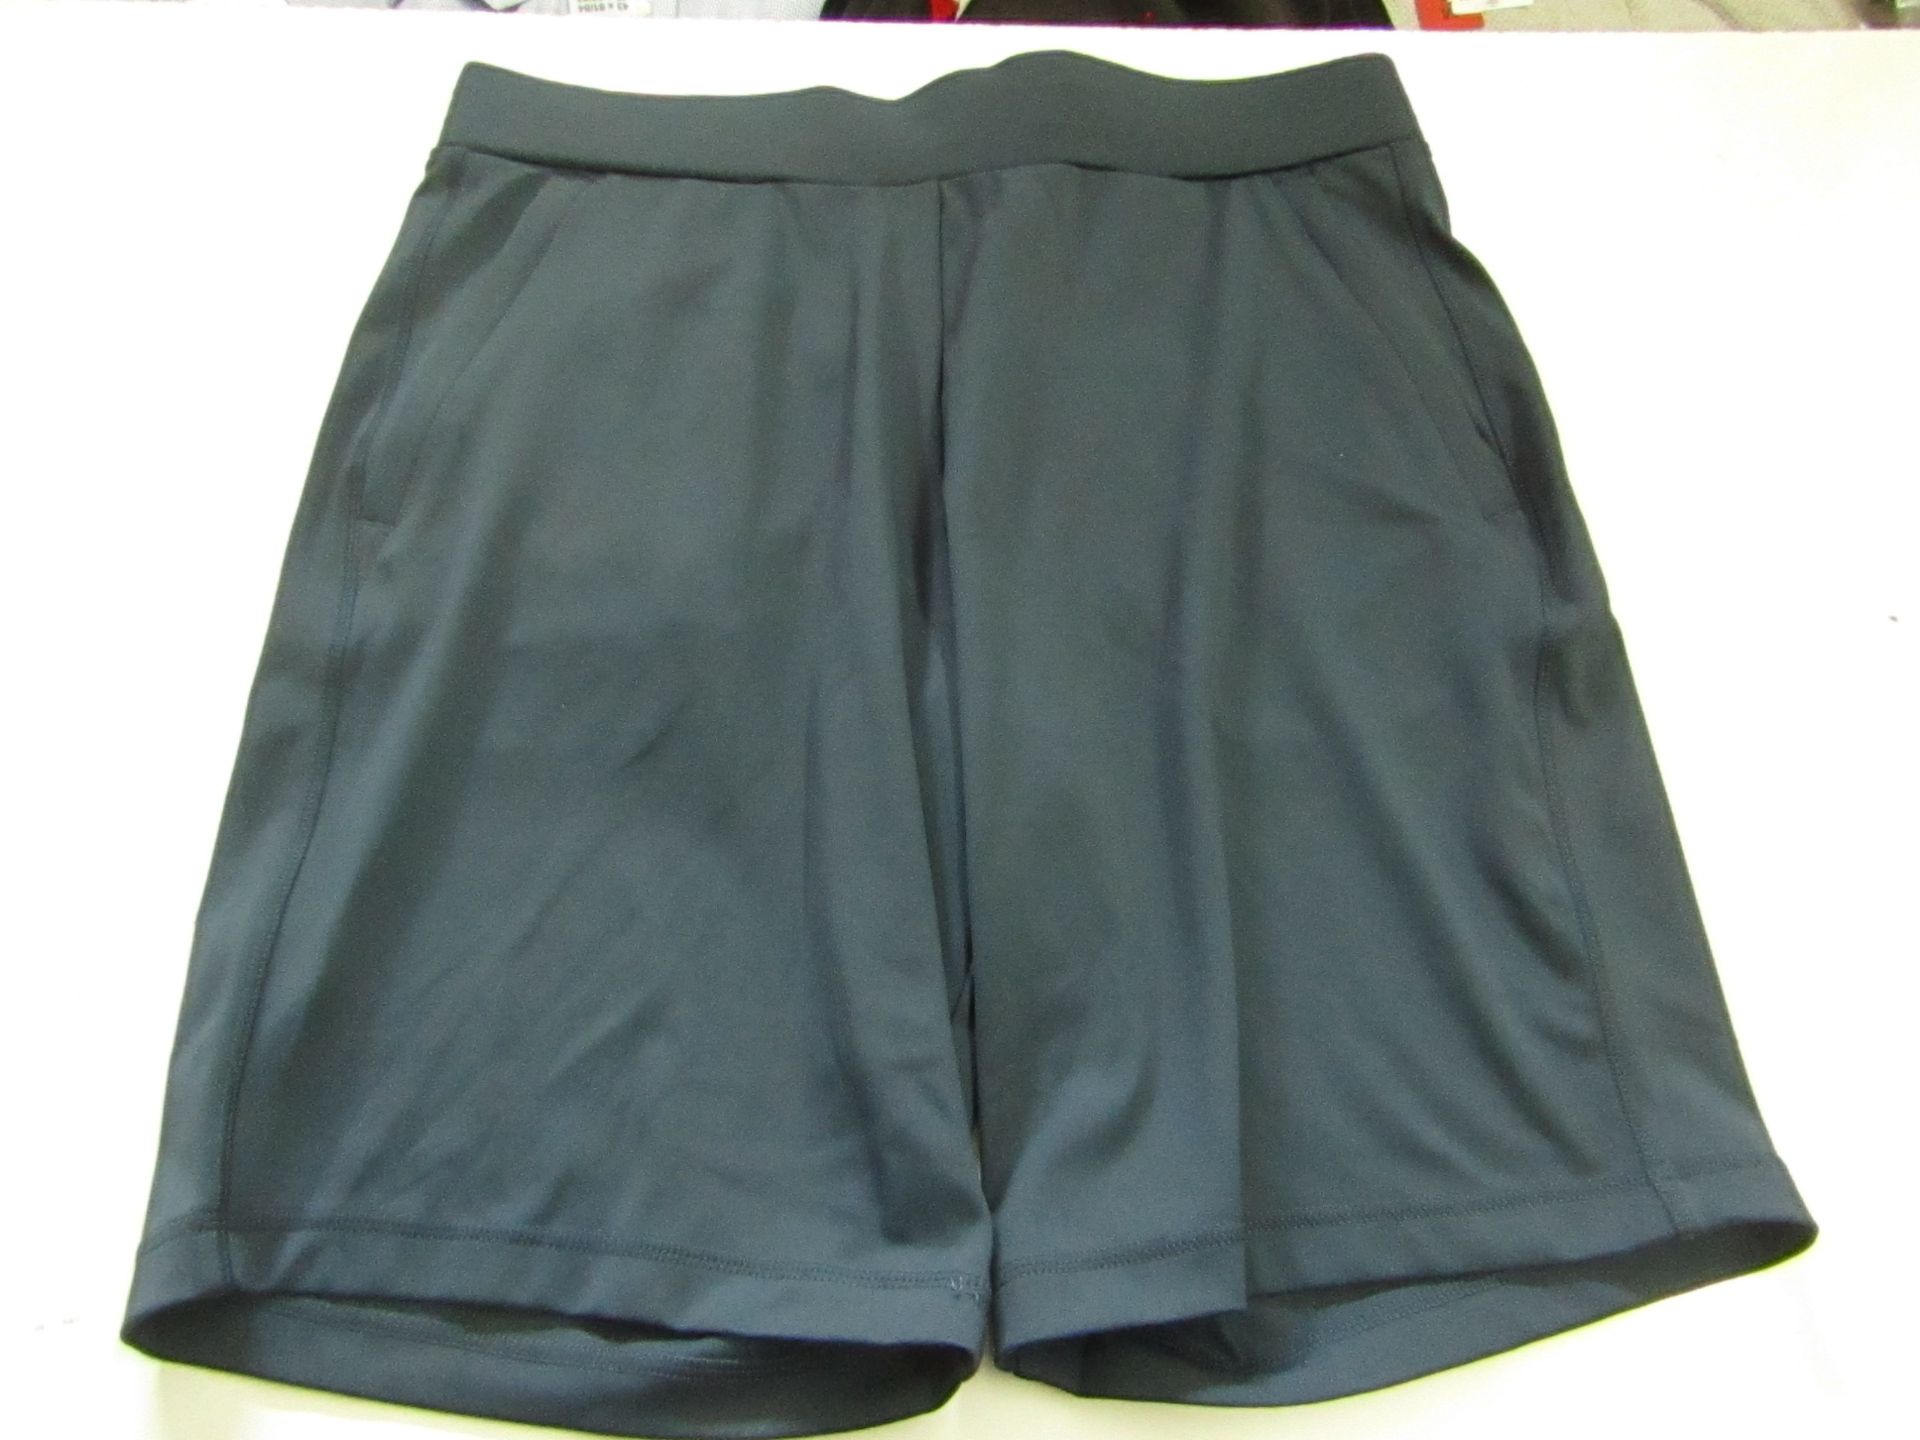 1 X Pair of 32 Degrees Flex Shorts ocean Size S New No Tags